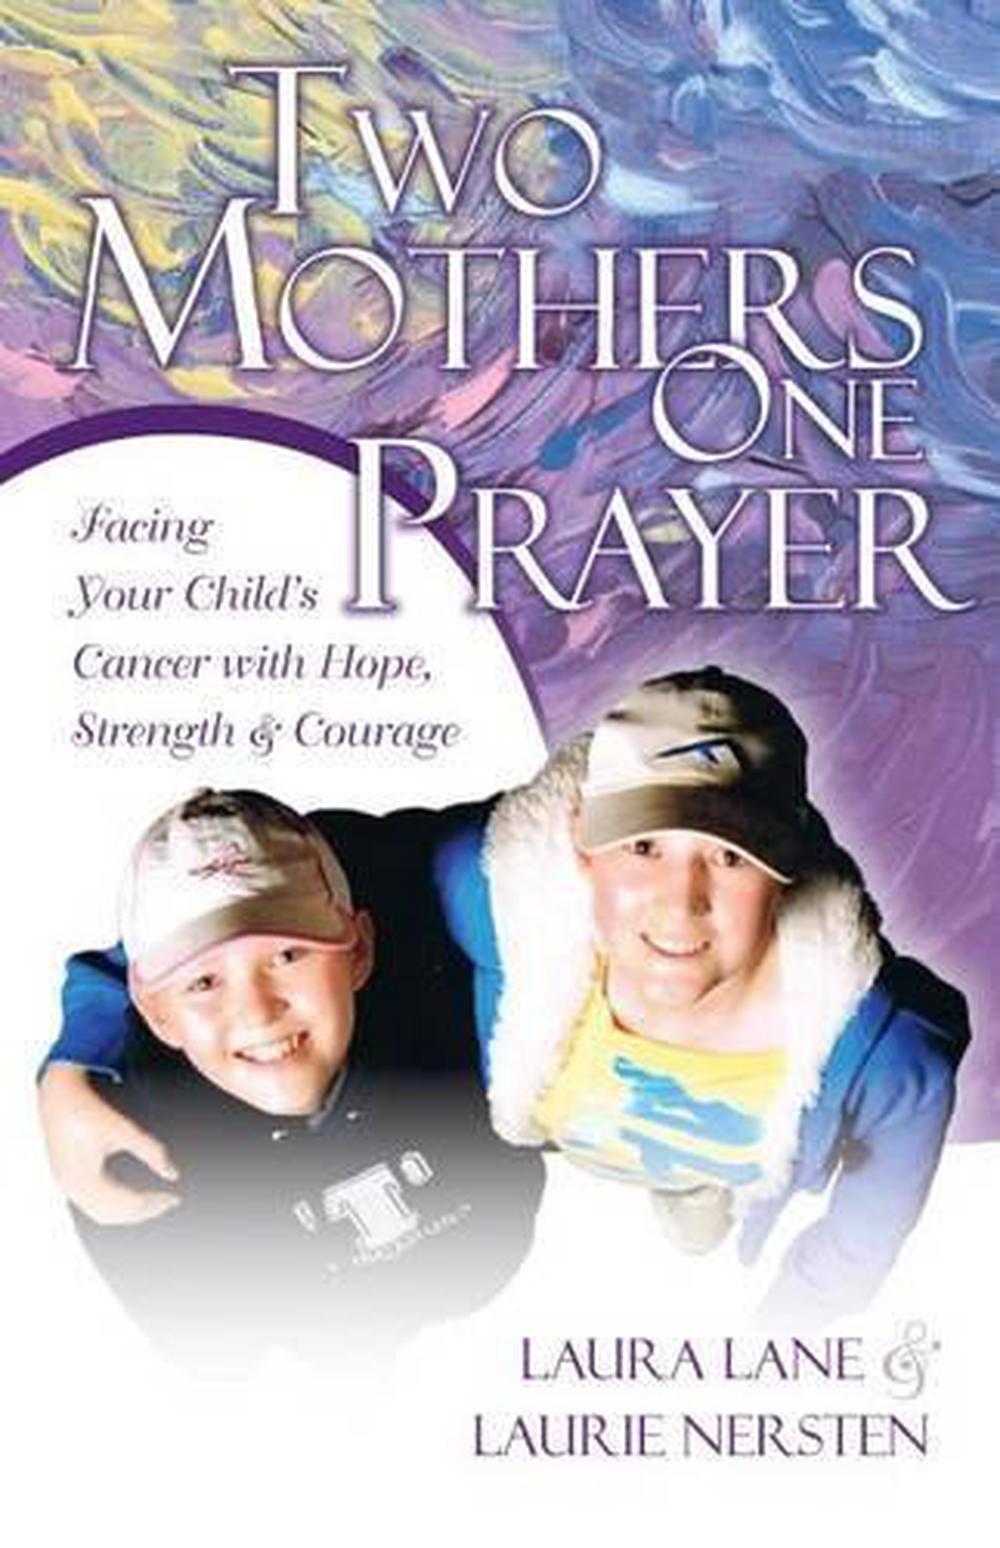 Two Mothers, One Prayer by Laura Lane